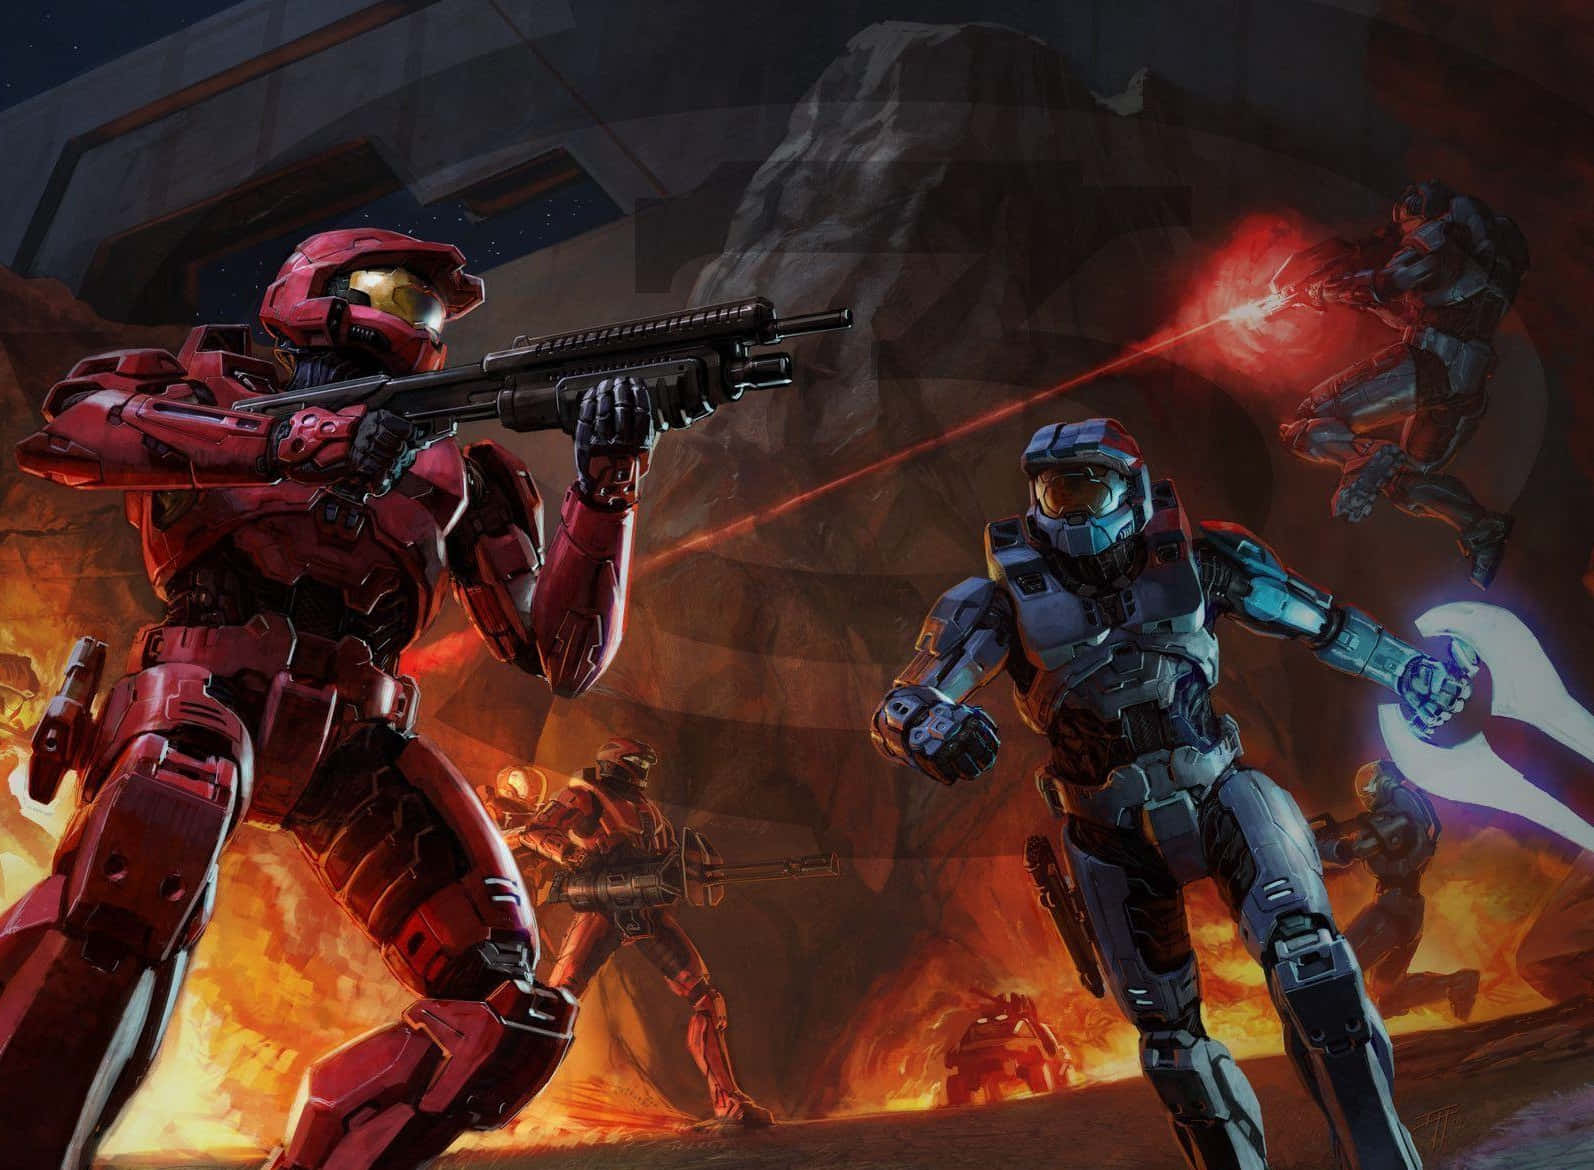 Halo Spartans Ready for Battle Wallpaper